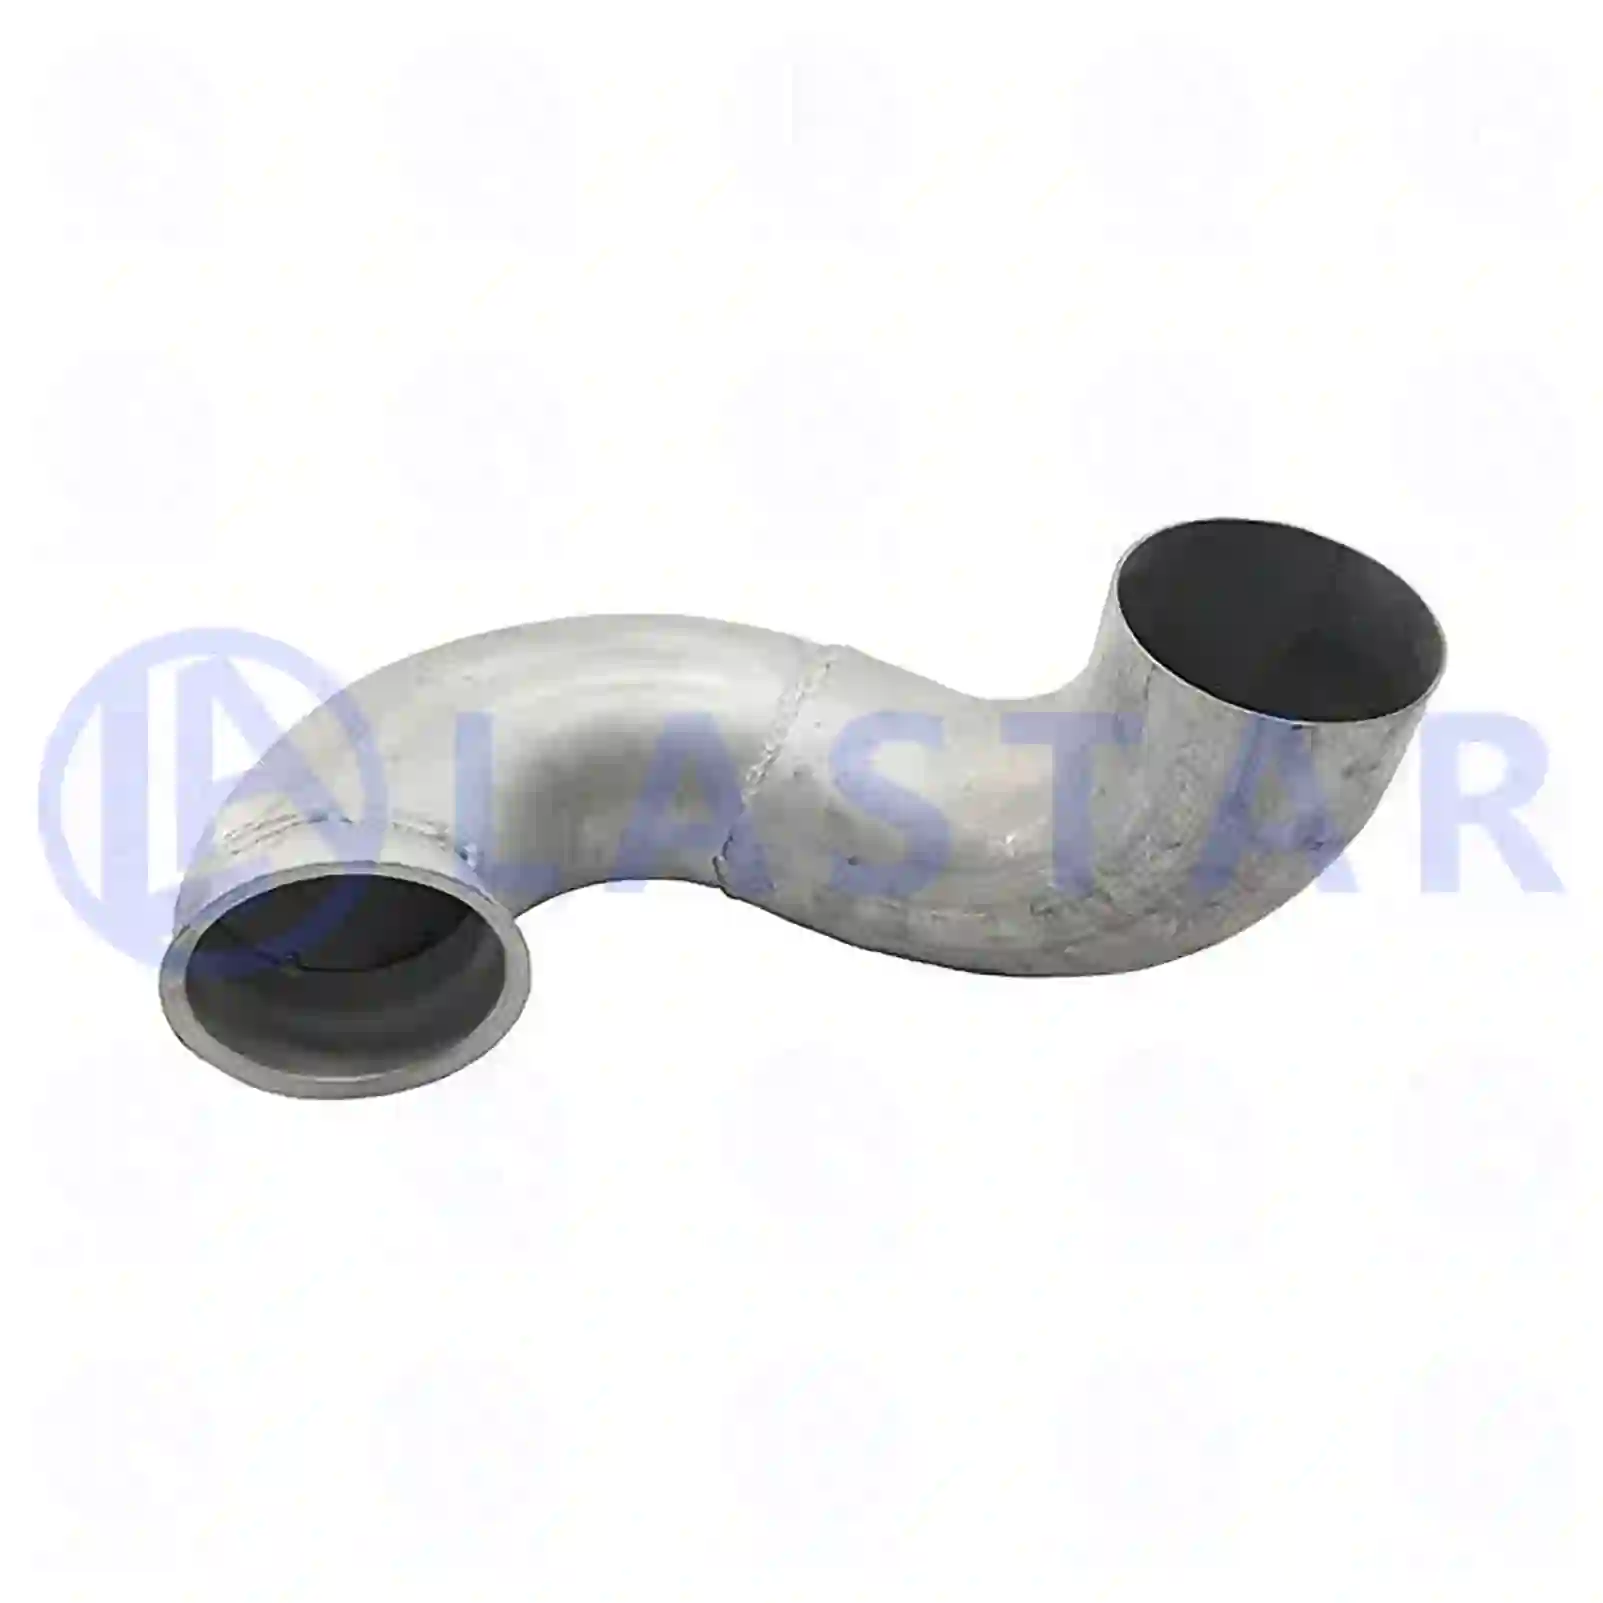 Exhaust pipe, 77707007, 1340470, 1413893, ZG10289-0008 ||  77707007 Lastar Spare Part | Truck Spare Parts, Auotomotive Spare Parts Exhaust pipe, 77707007, 1340470, 1413893, ZG10289-0008 ||  77707007 Lastar Spare Part | Truck Spare Parts, Auotomotive Spare Parts